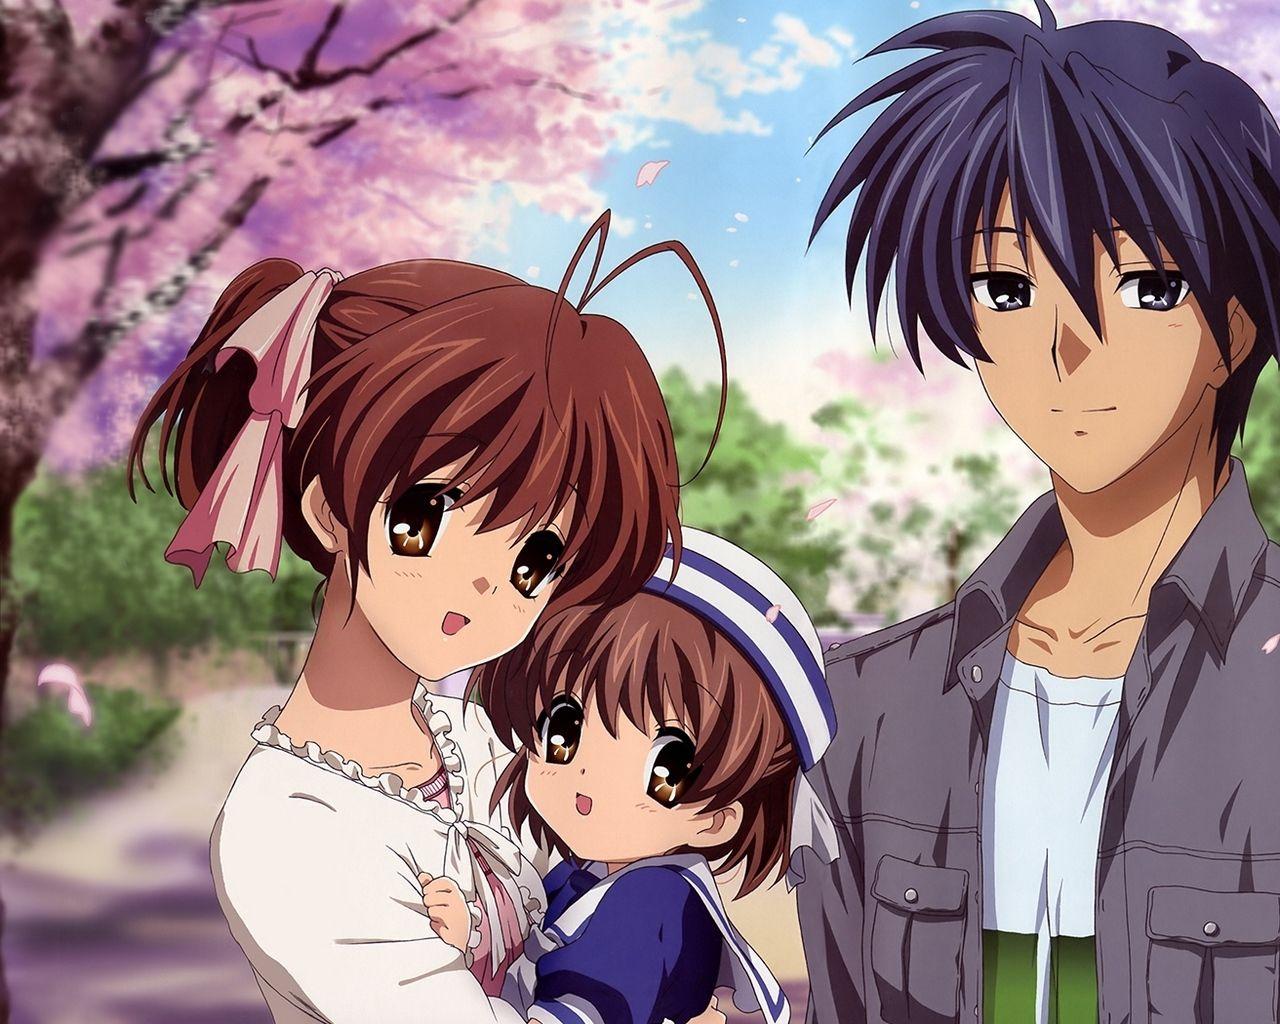 Family Picture Anime / Anime Family Images On Favim Com : Life changes